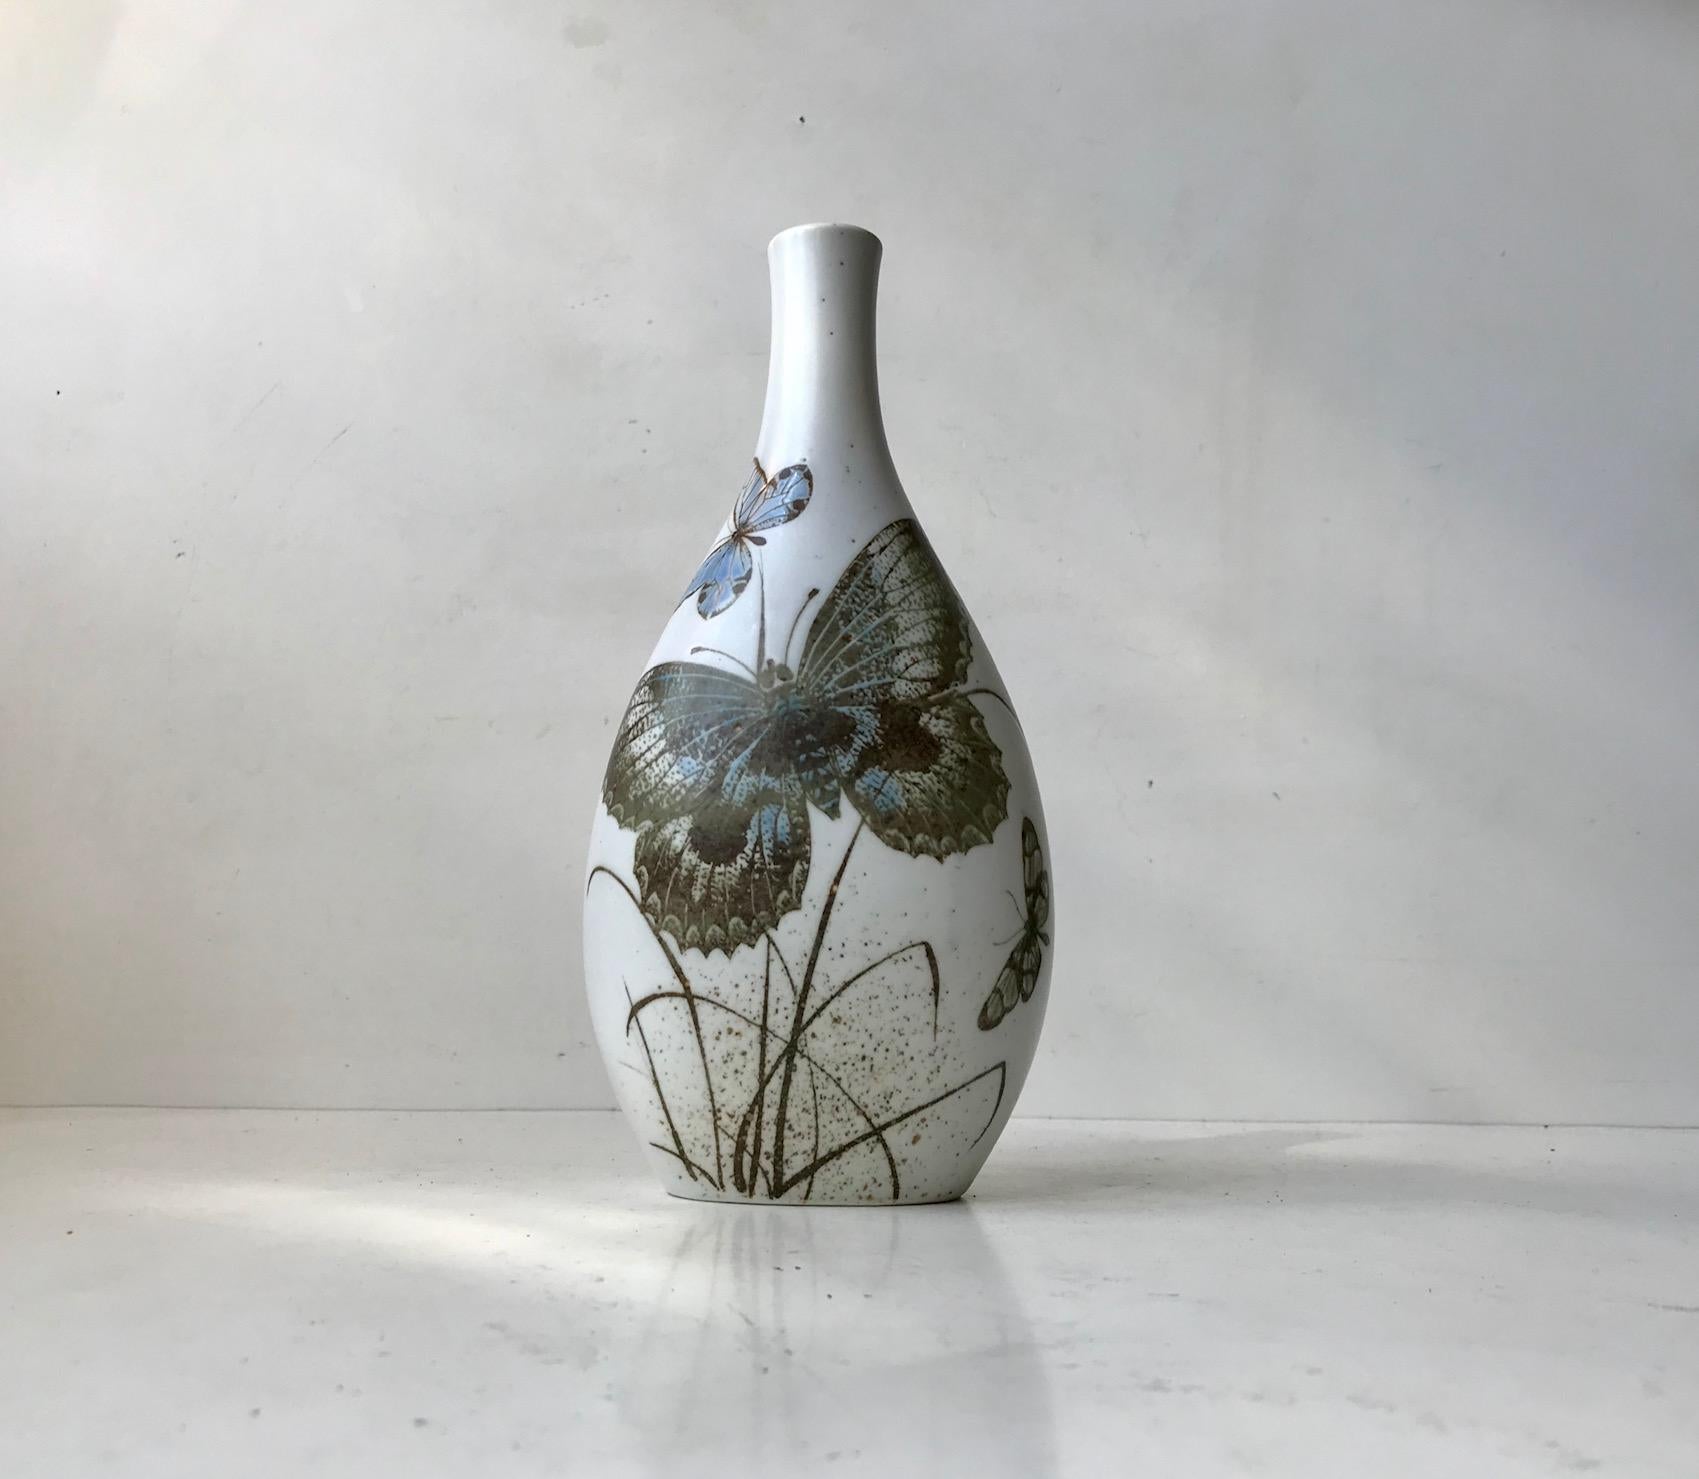 Ceramic Royal Copenhagen Vase with Butterflies by Nils Thorsson, 1970s